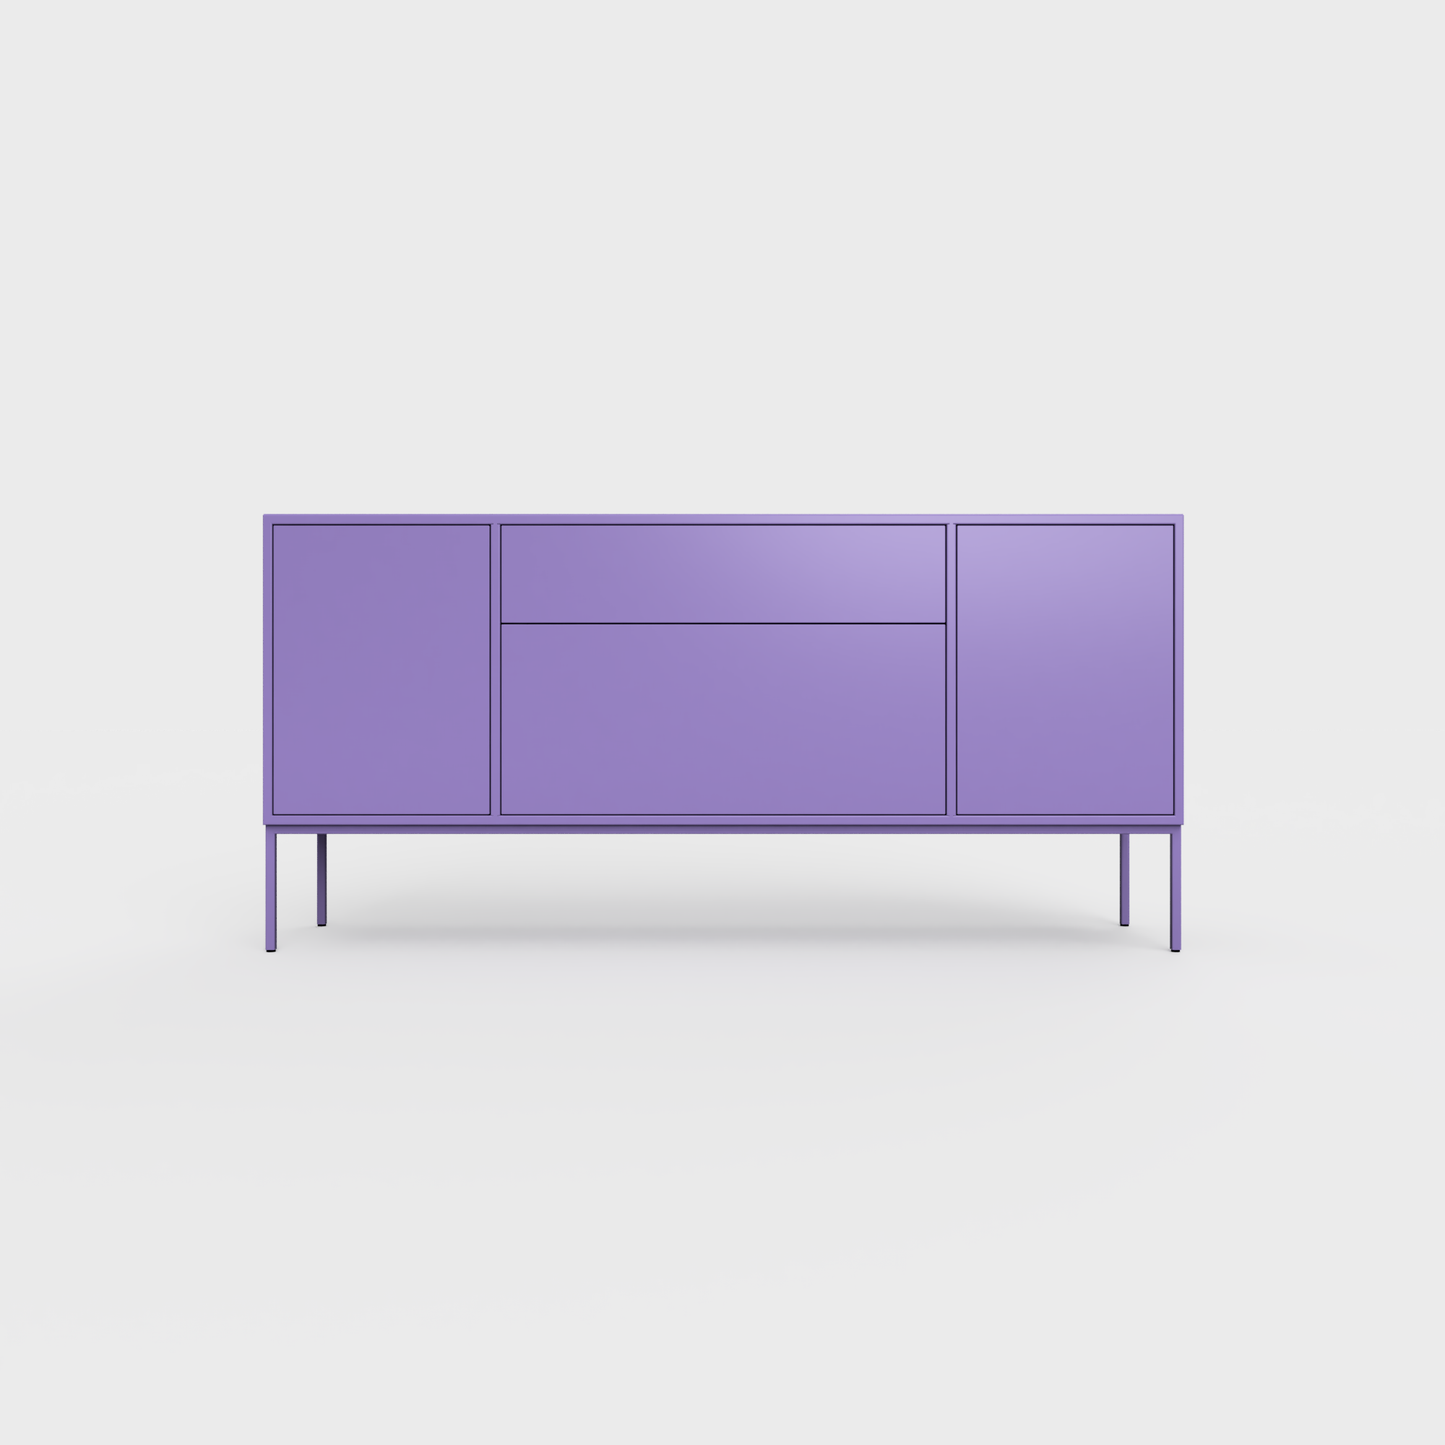 Arnika 02 Sideboard in Iris color, powder-coated steel, elegant and modern piece of furniture for your living room